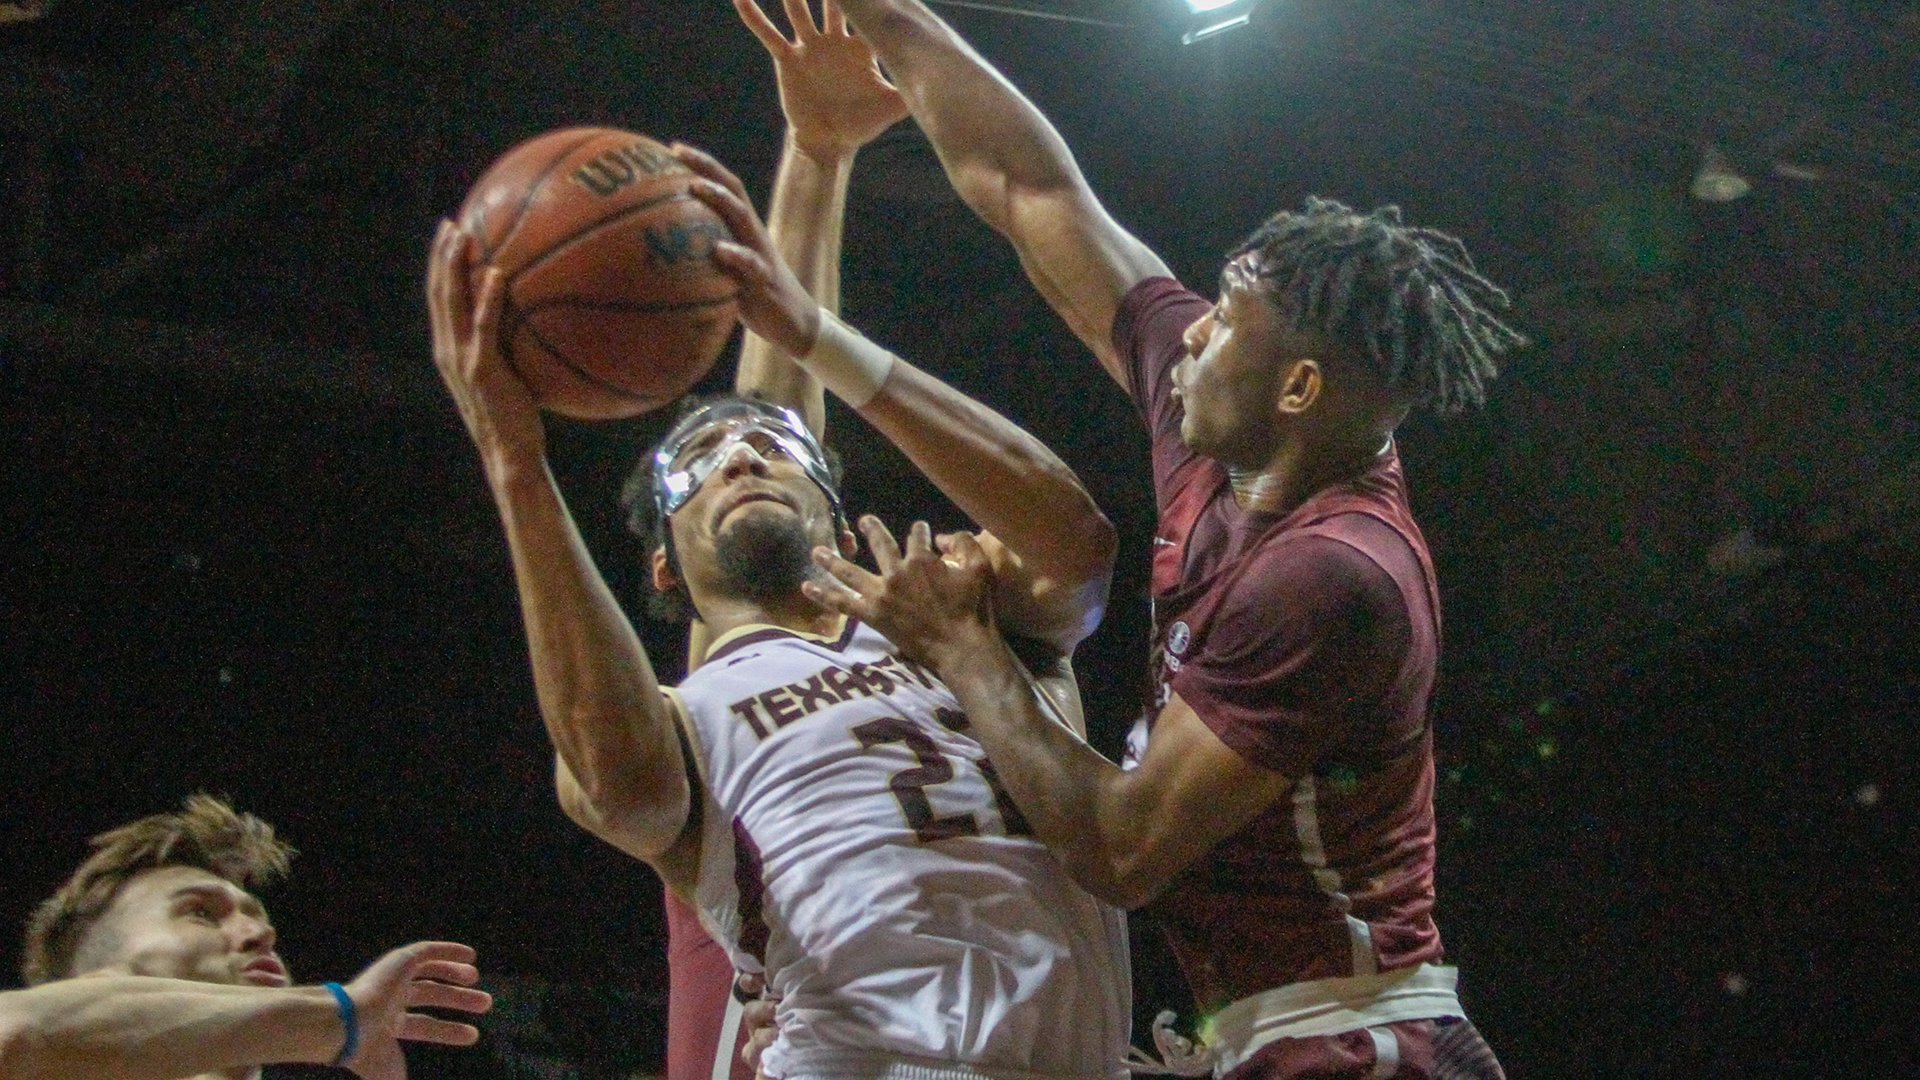 Basketball Player in white jersey goes up for a layup against another Basketball player in a maroon jersey.